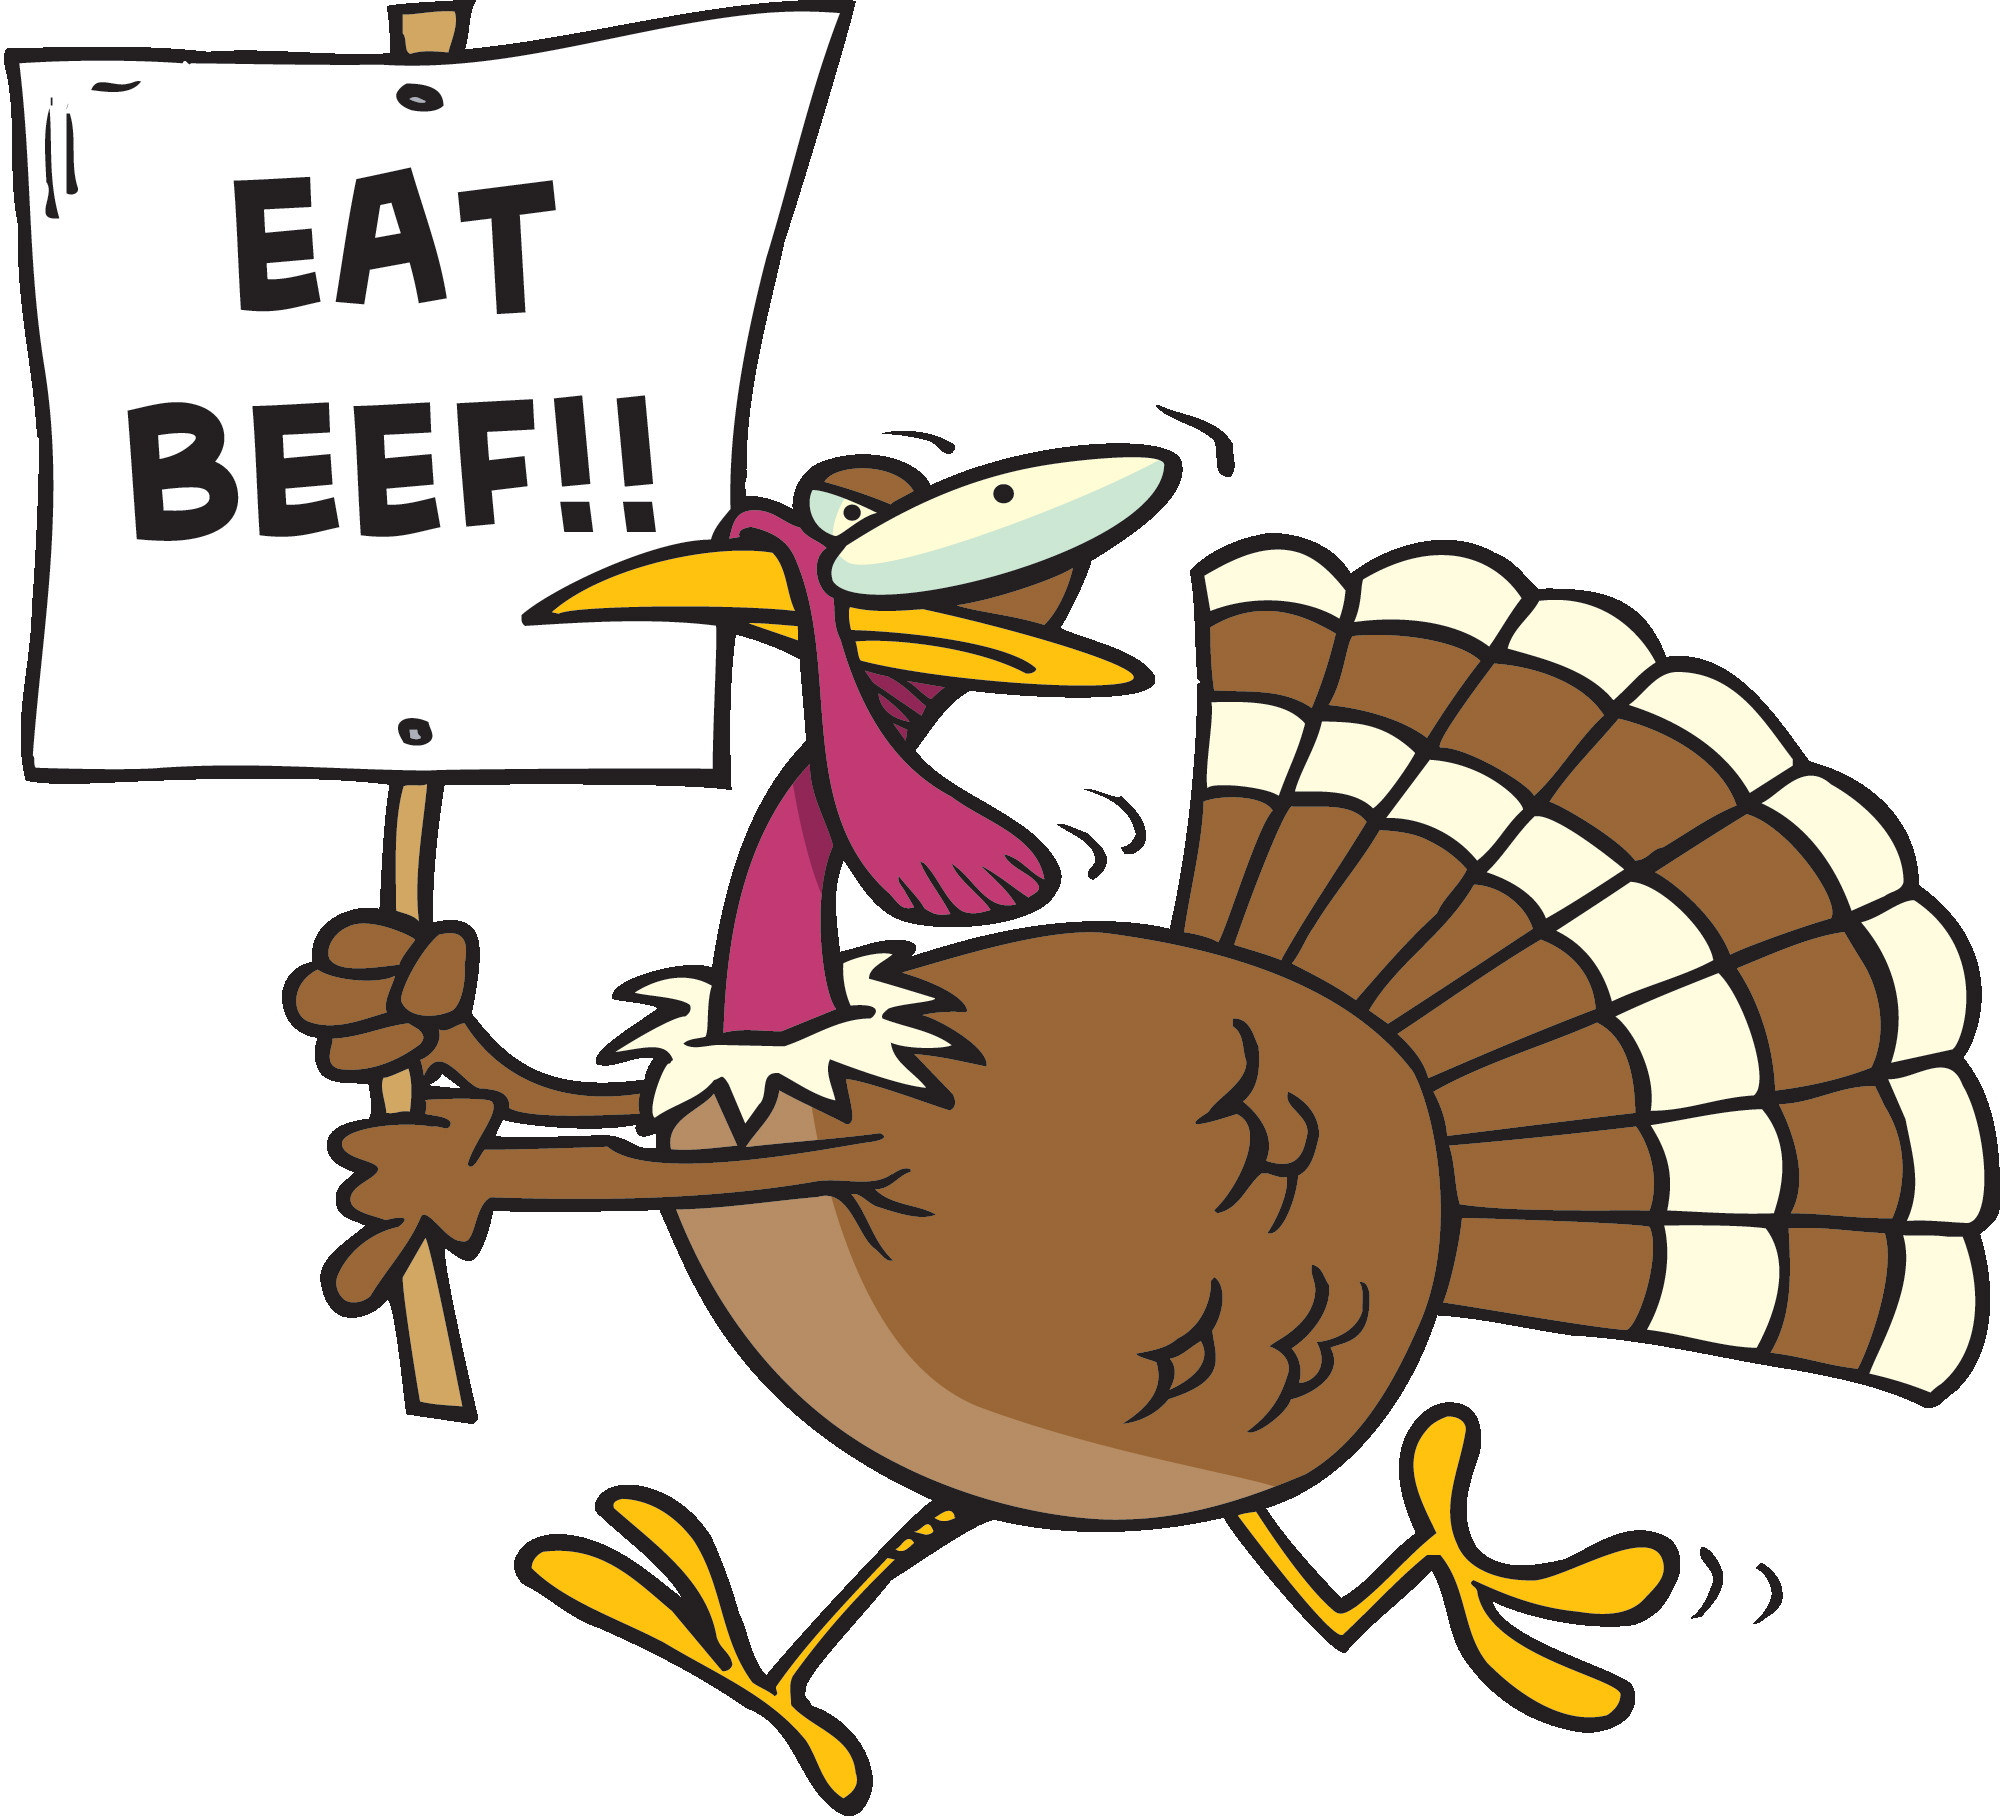 Thanksgiving Turkey Funny
 Eat Beef Funny Turkey Clipart Image